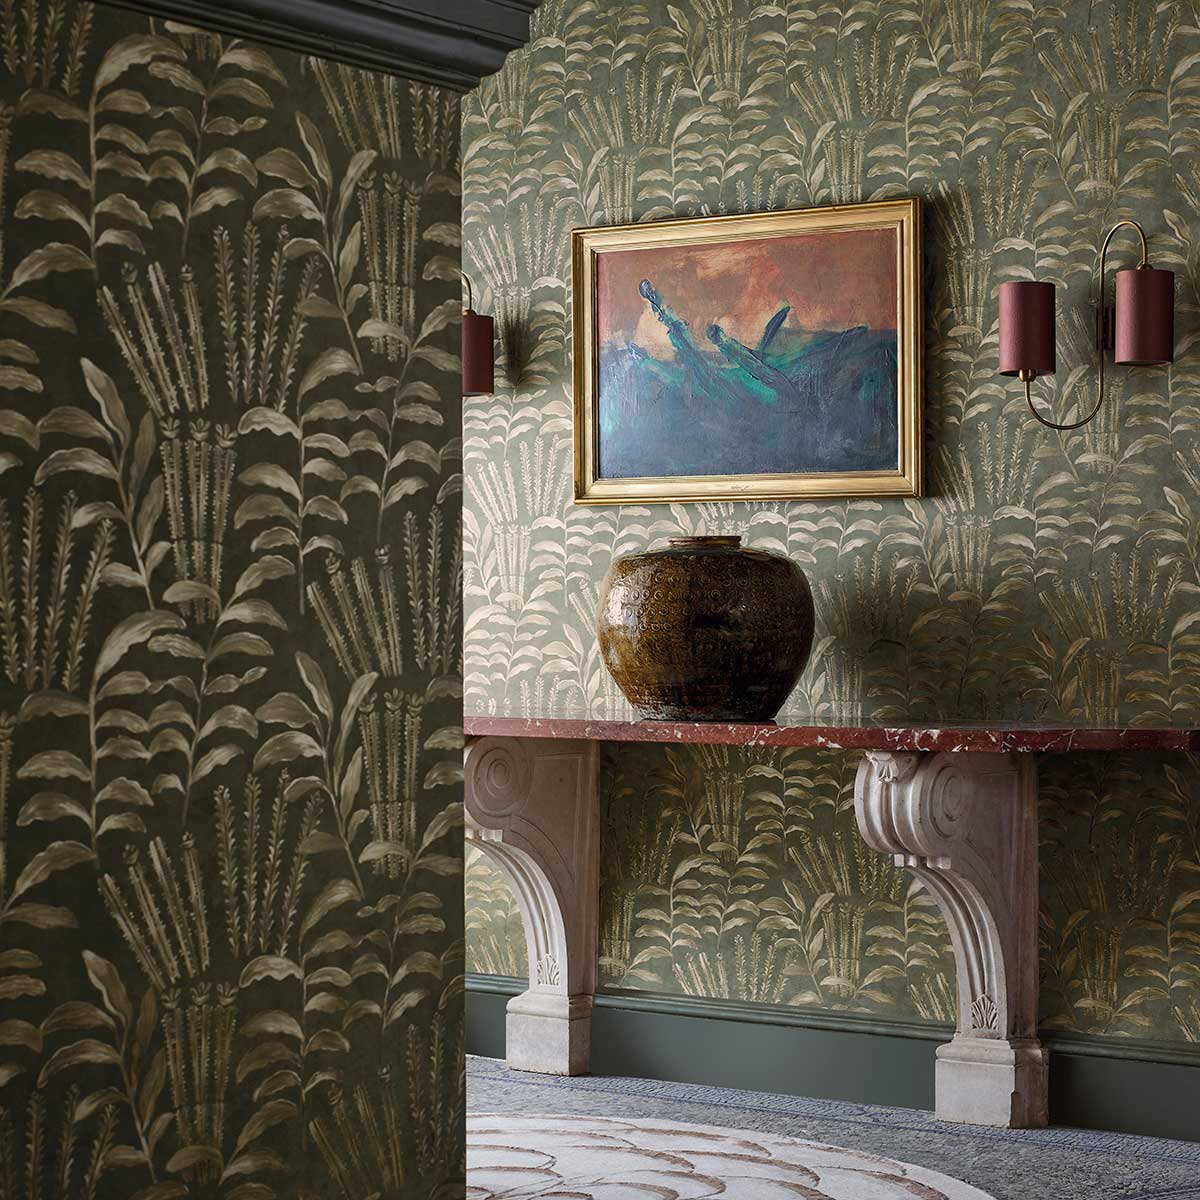 Highclere Wallpaper - Olivine - by Zoffany